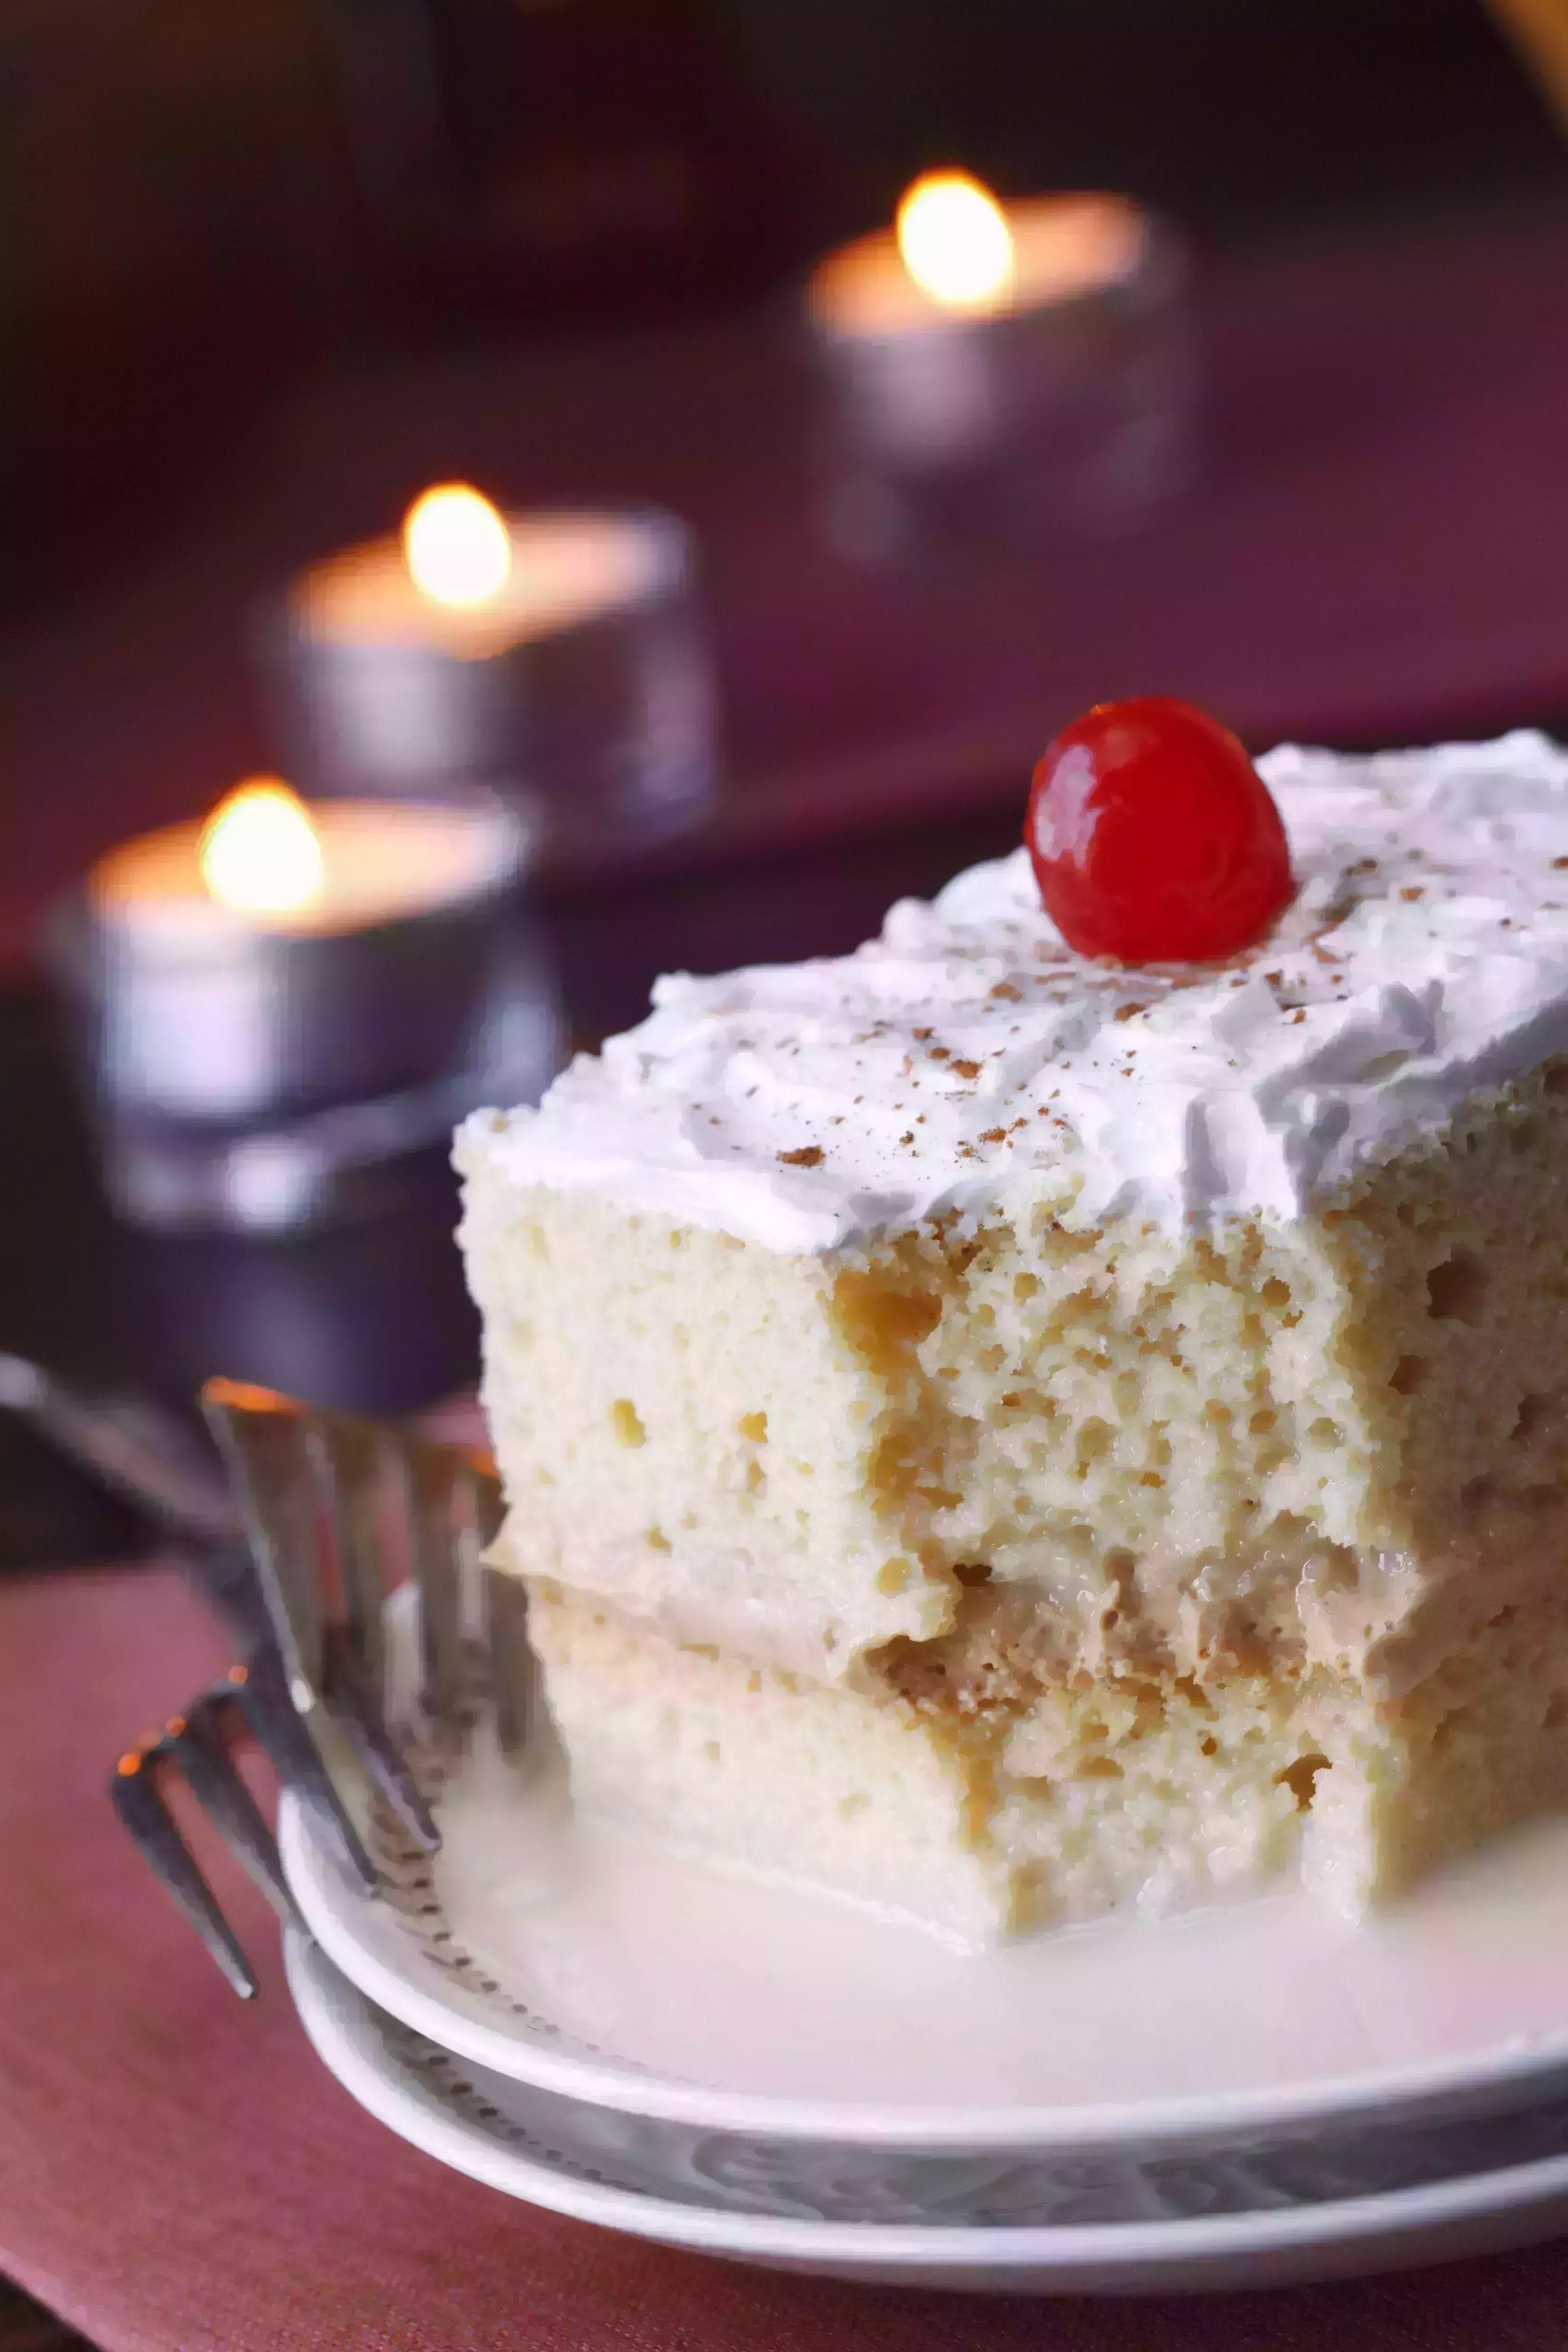 tres leches cake with cinnamon and a cherry partially eaten